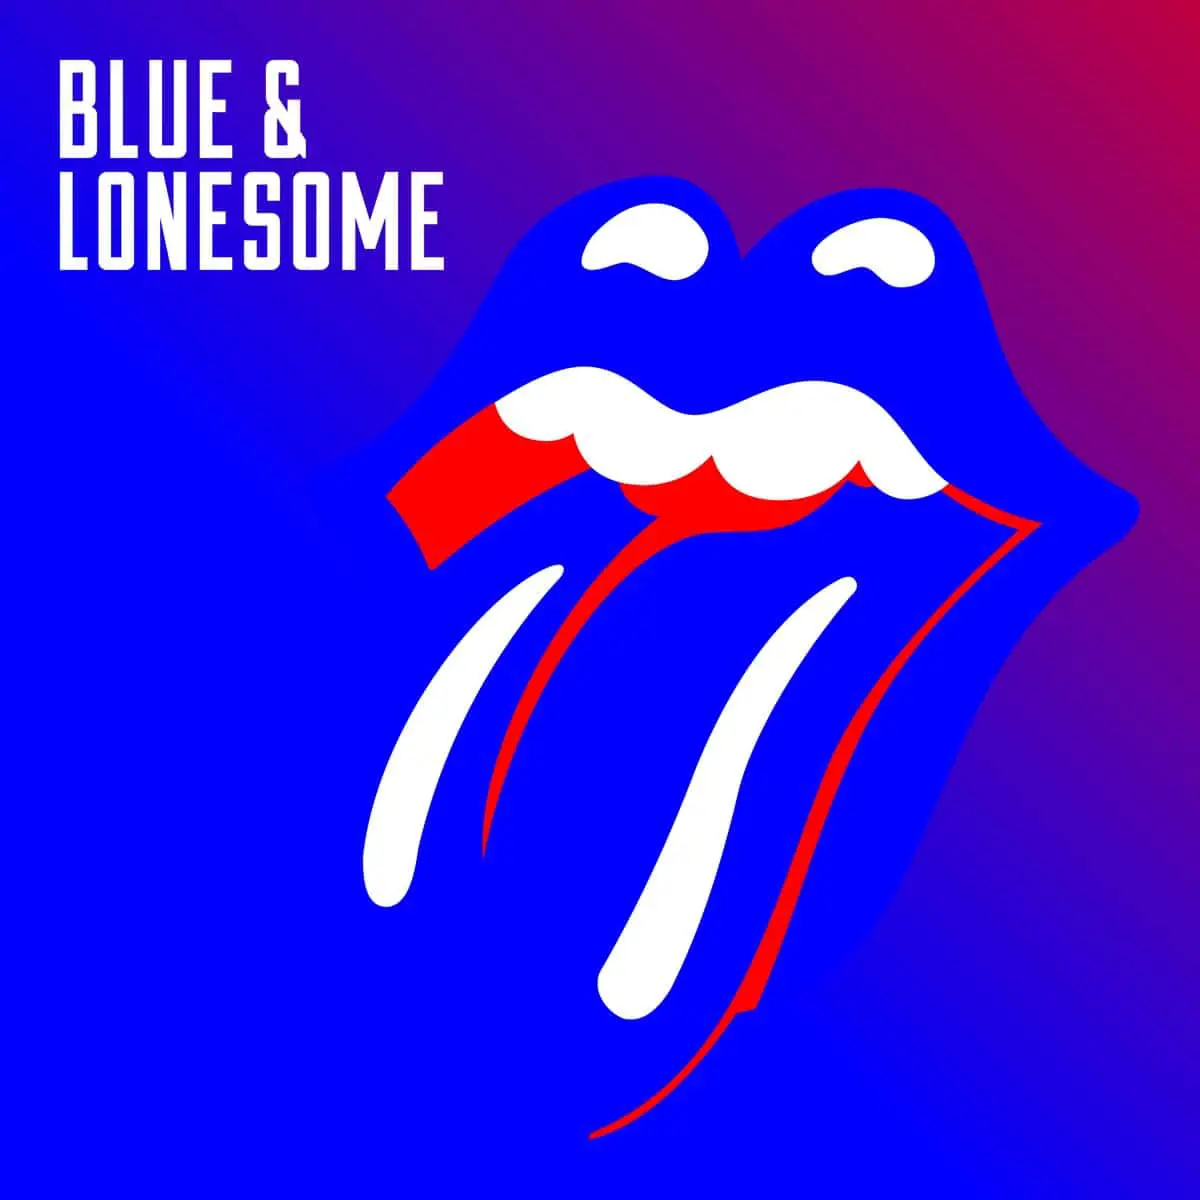 The Rolling Stones -Blue & Lonesome